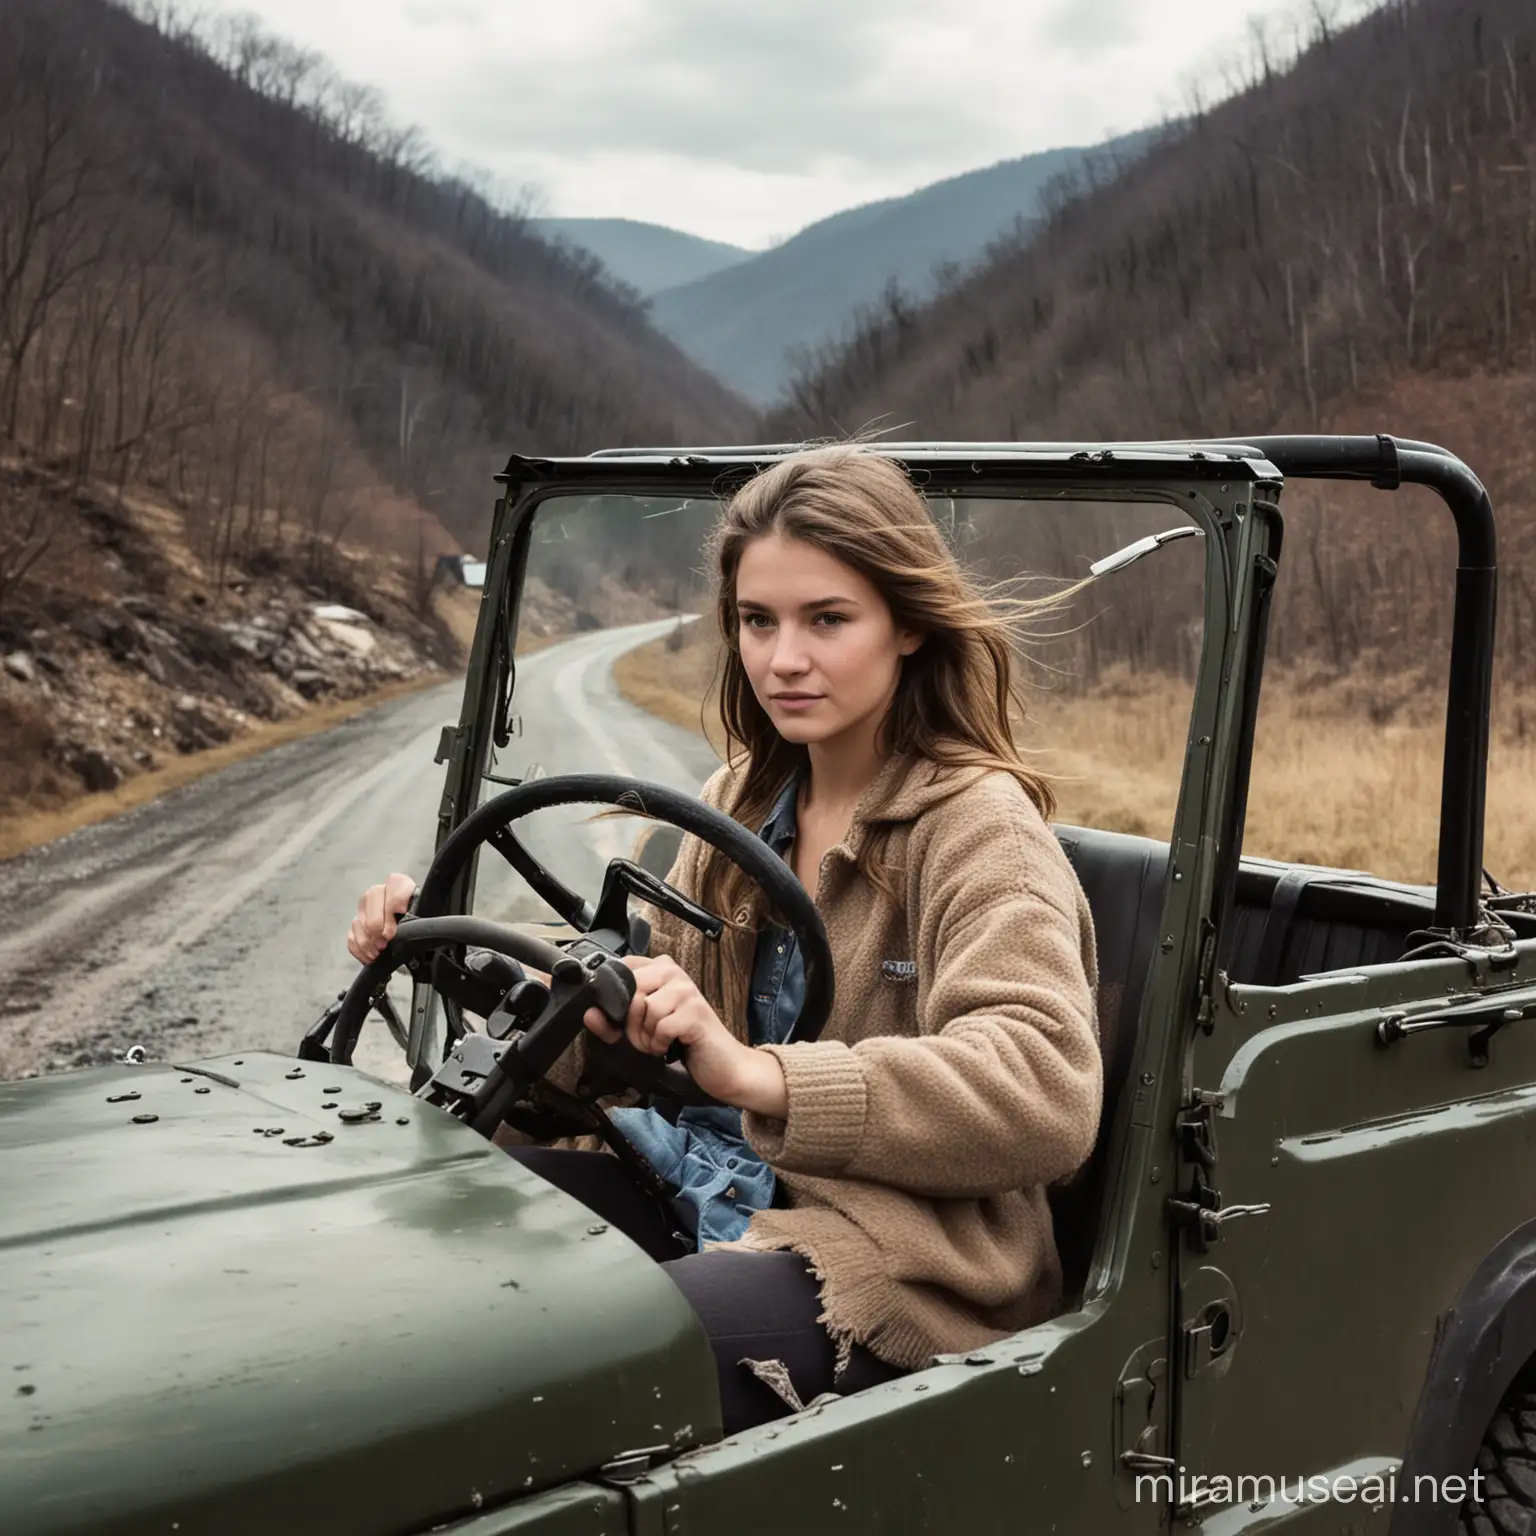 daughter  of the most powerful coal mine owner of the Appalachian mountains in his late 20s driving an open jeep